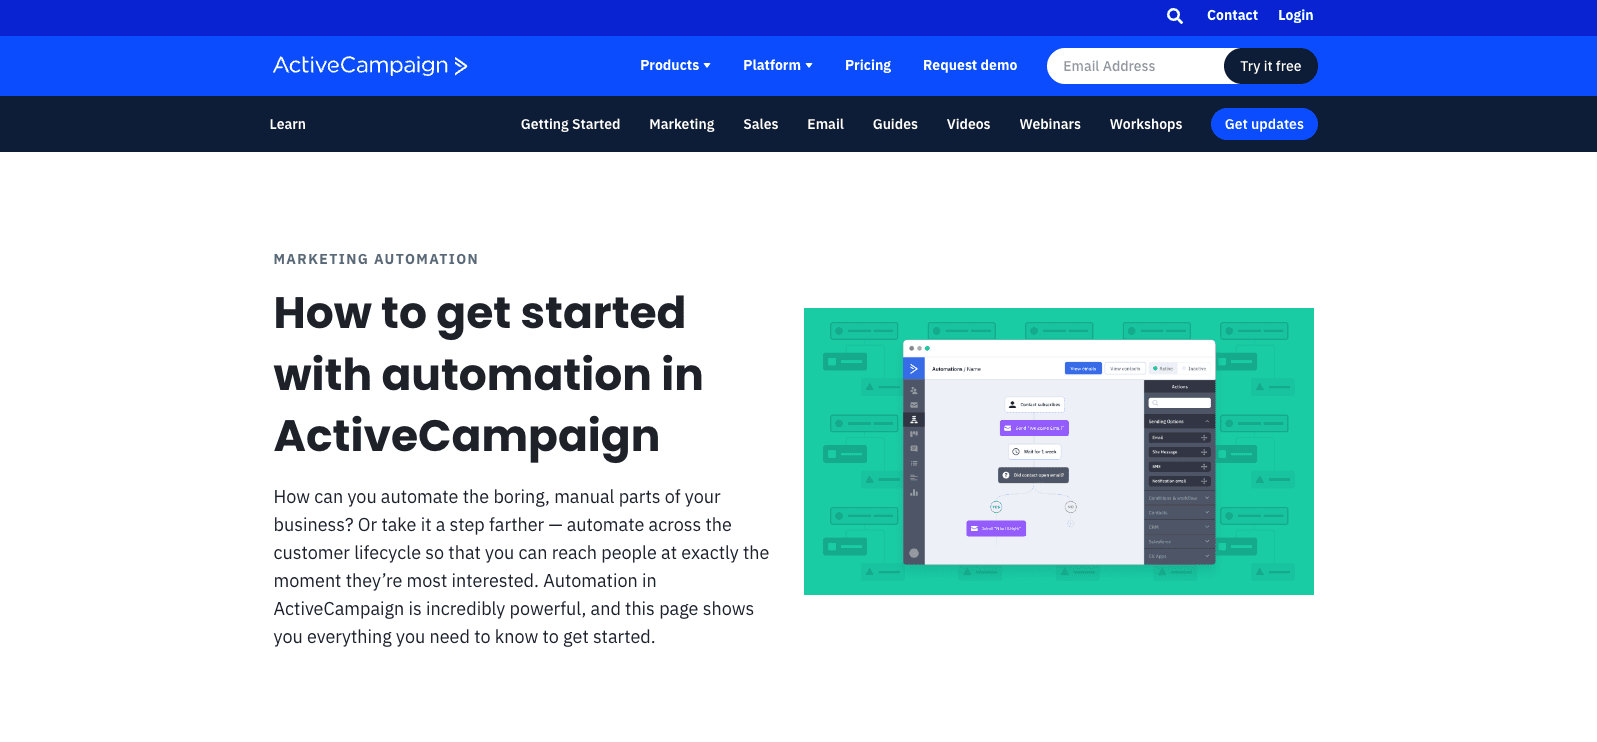 Active Campaign's marketing automation software